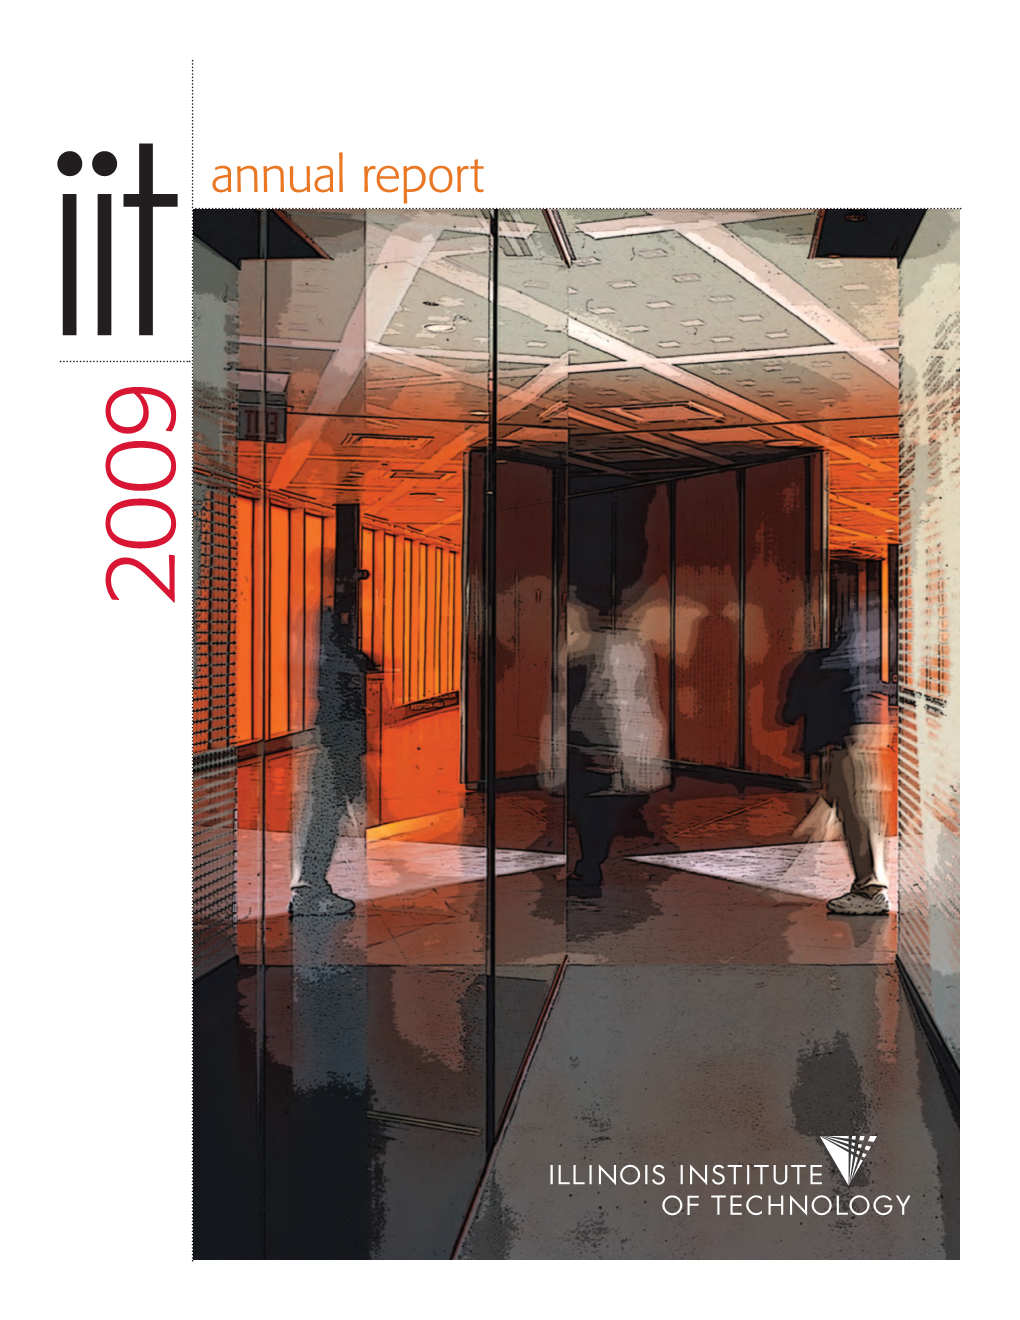 2009 Annual Report Officeofthepresident Chicago, IL 60616 Chicago,IL Perlstein Hall223 Illinois Institute 10 W33rd Street of Technology Page 1